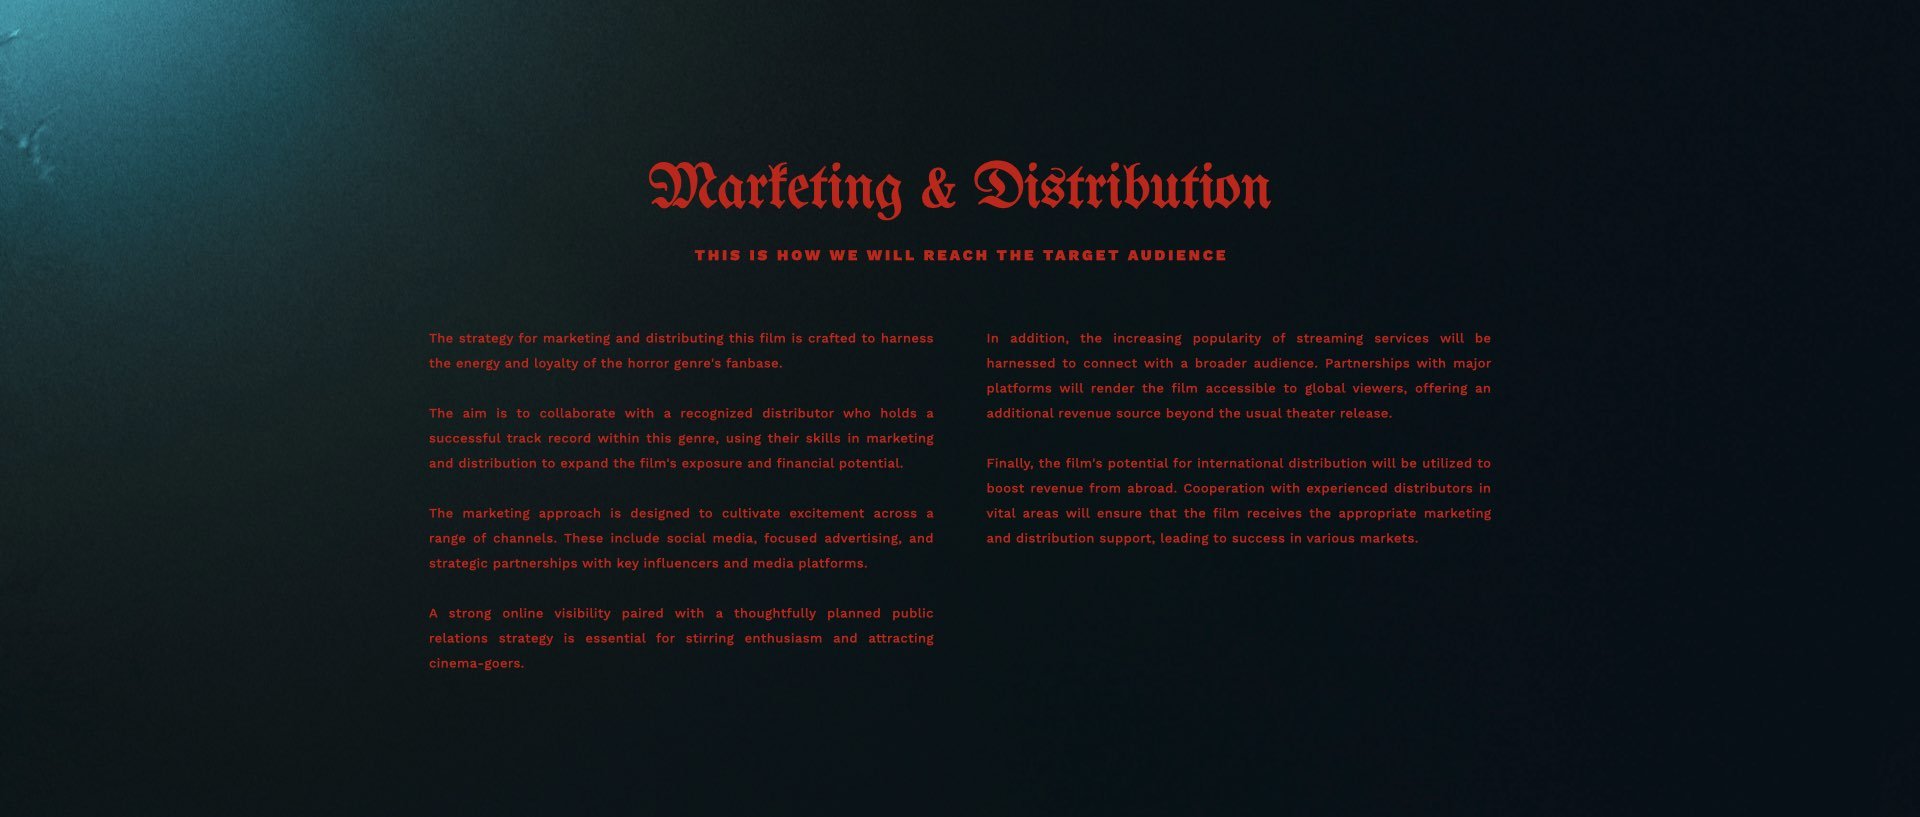 ‎Film Pitch Deck Template - Sinister Obsession.‎034.jpeg